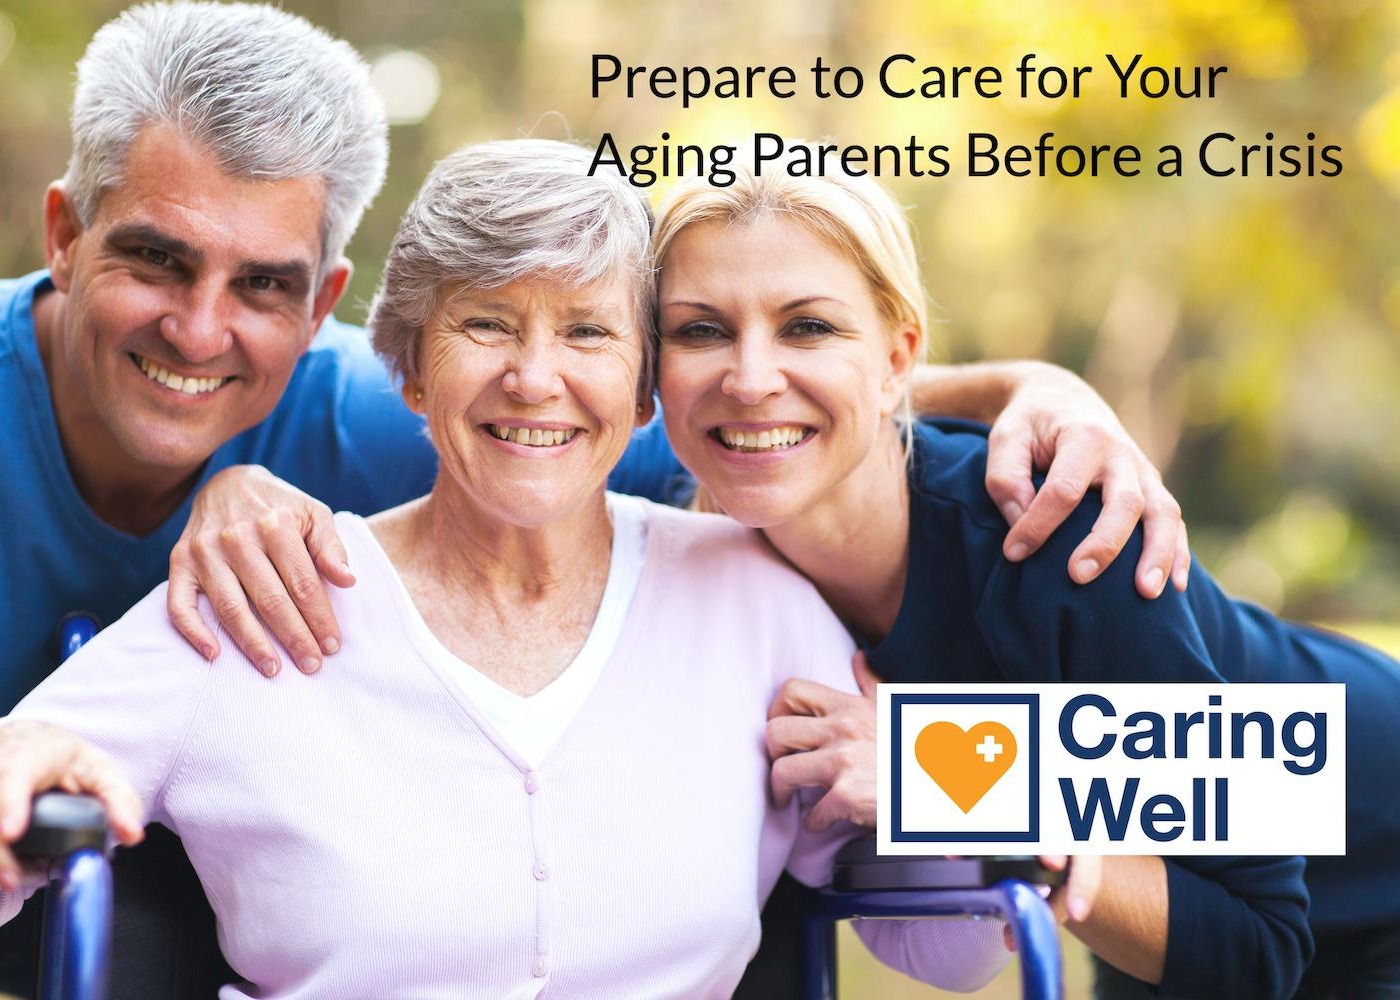 Webinar Recording: Prepare to Care for Your Aging Parents Before a Crisis